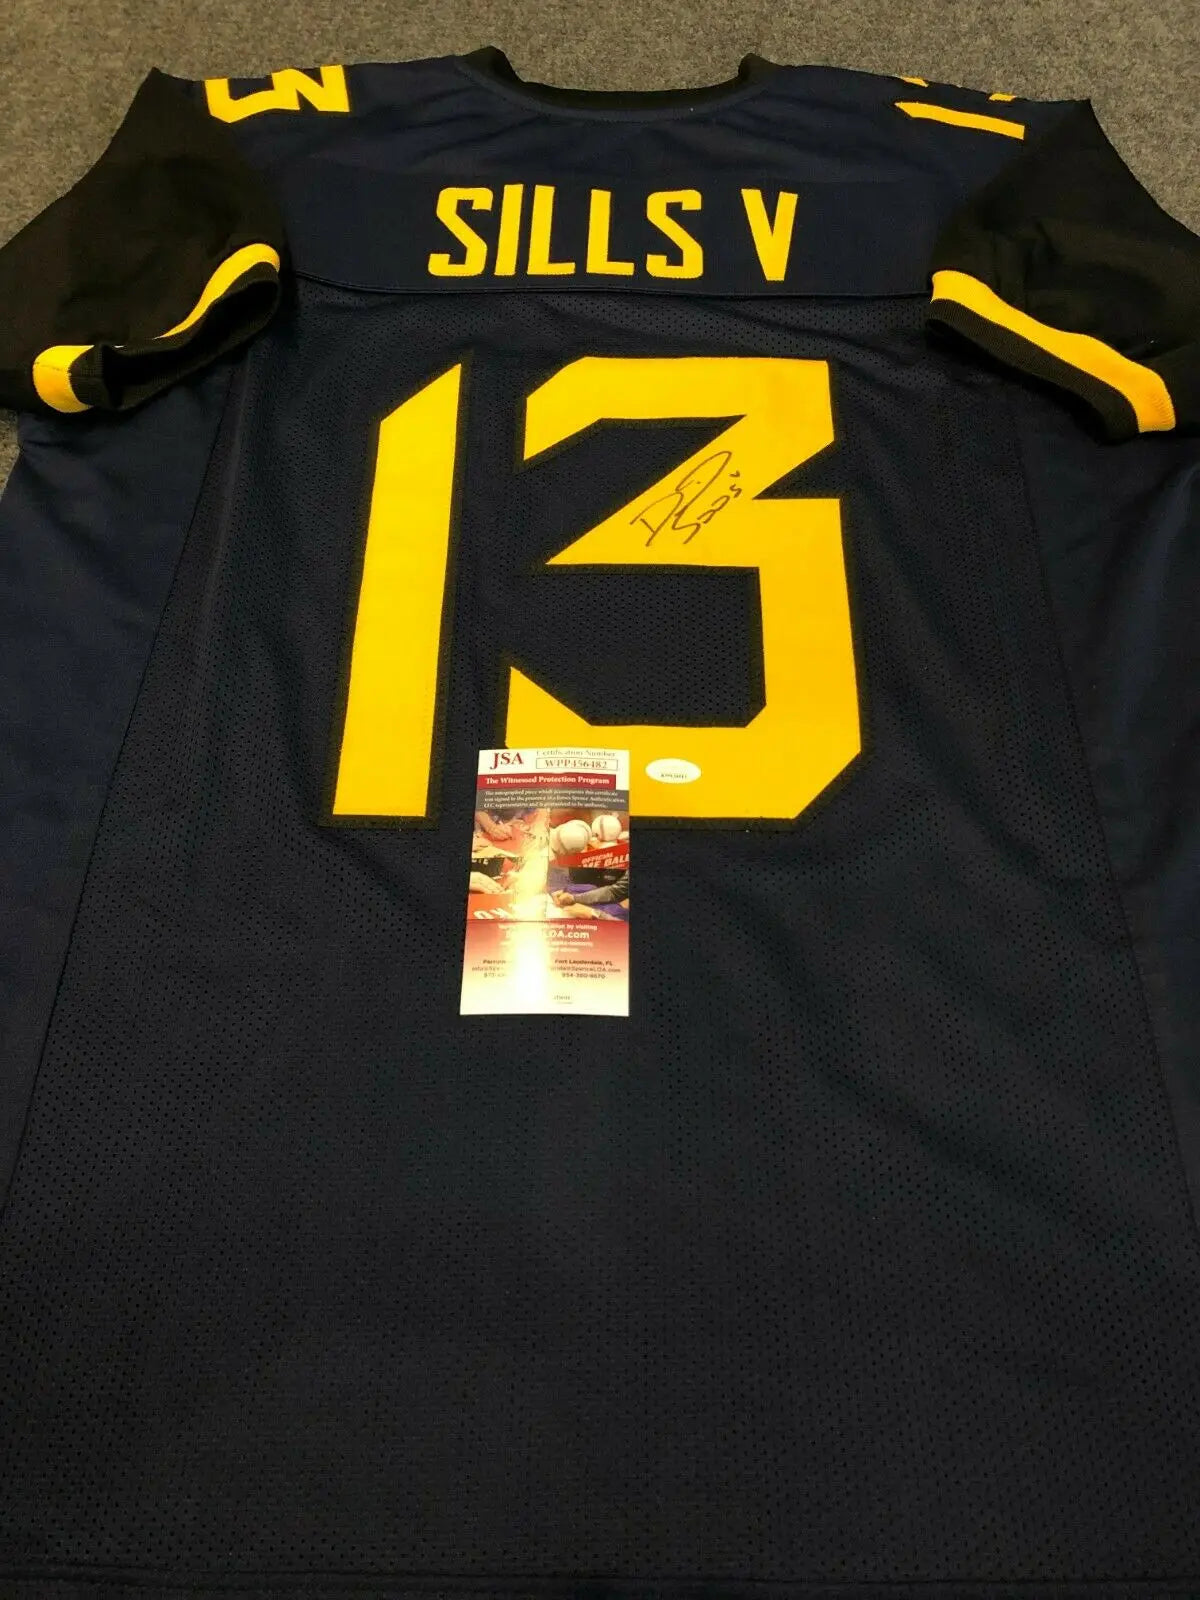 MVP Authentics West Virginia Mountaineers David Sills Autographed Signed Jersey Jsa Coa 116.10 sports jersey framing , jersey framing